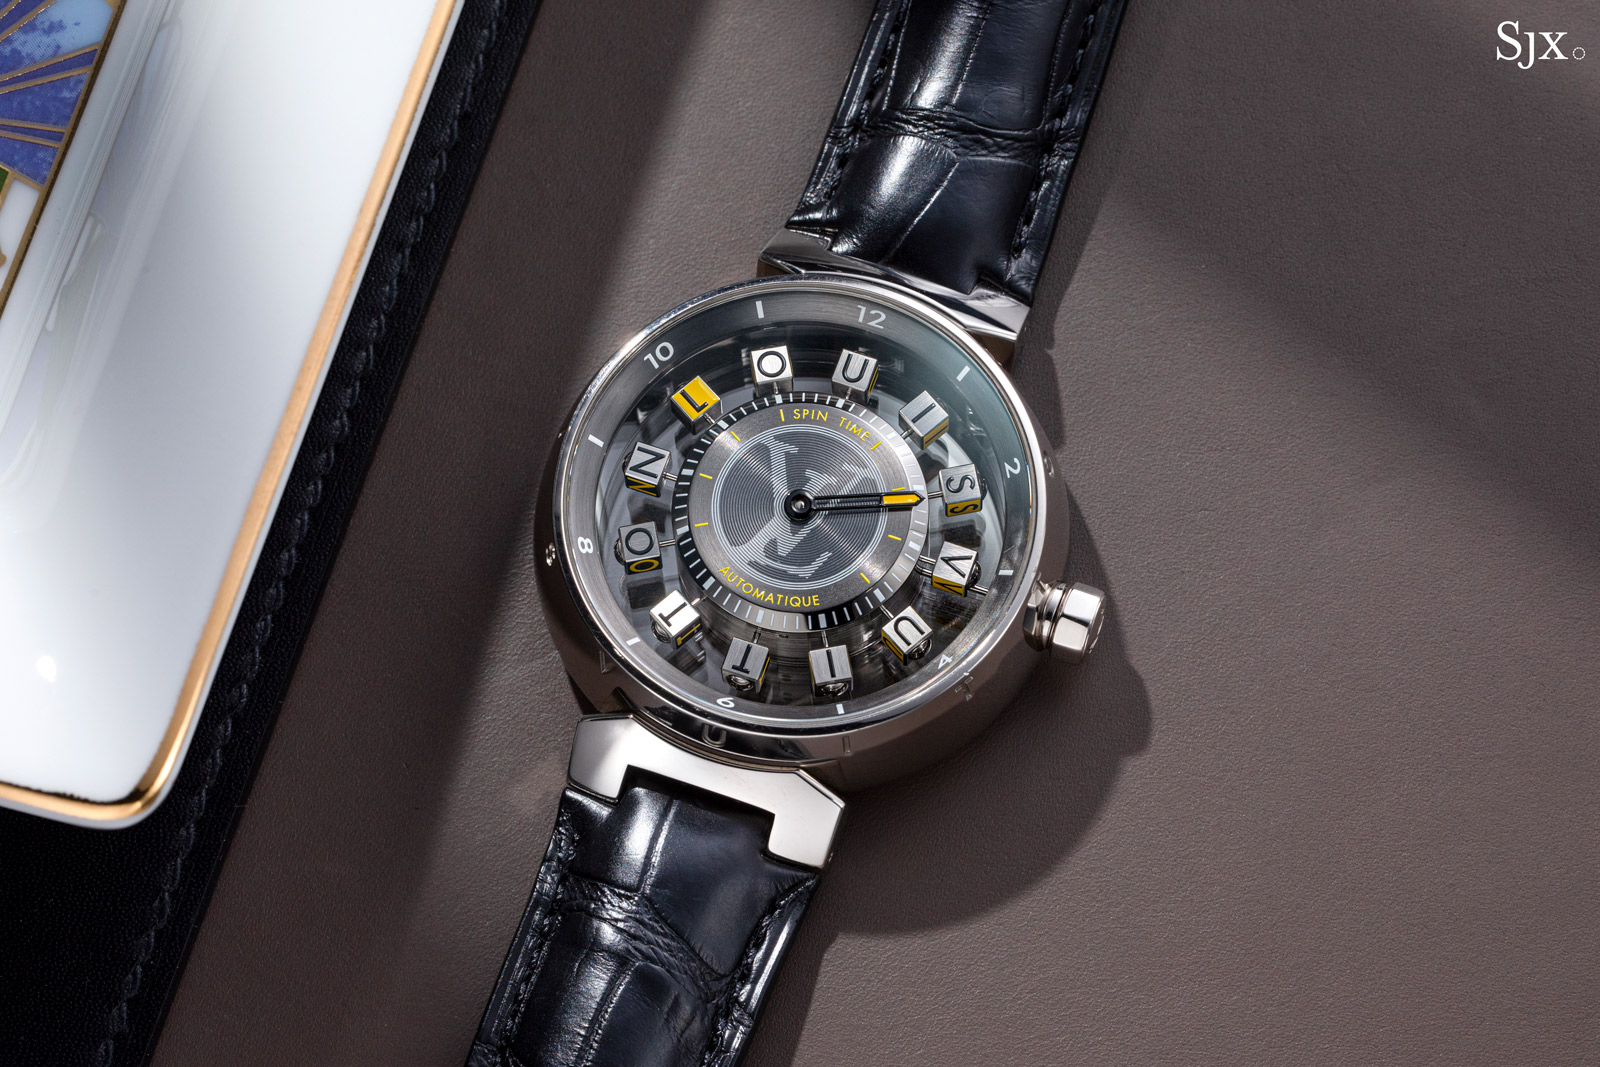 Louis Vuitton Tambour Spin Time collection: Fun and stylish timepieces -  Luxurylaunches